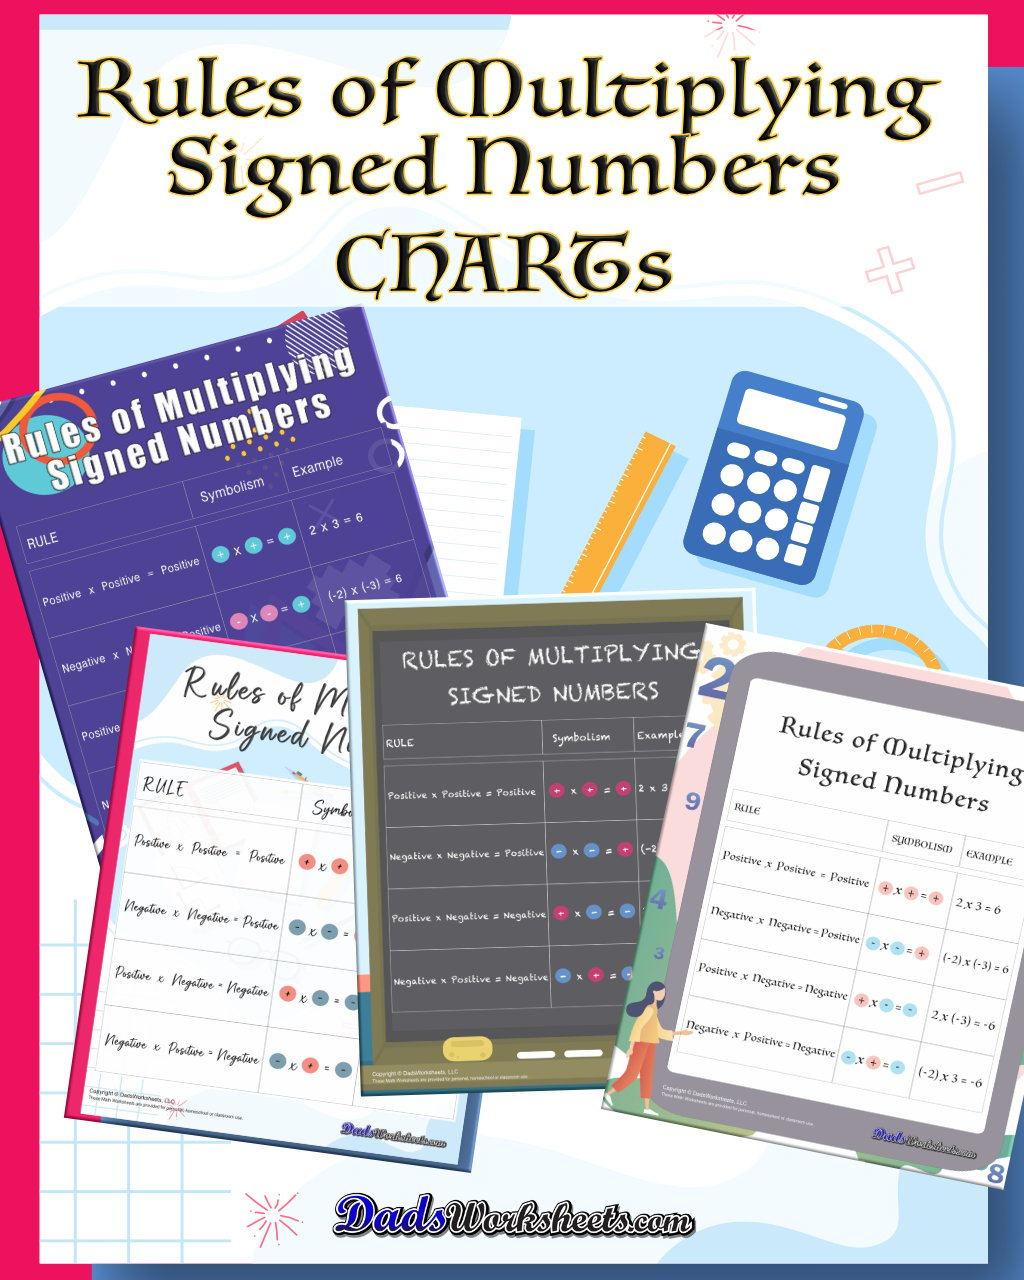 Rules of Multiplying Signed Numbers Chart